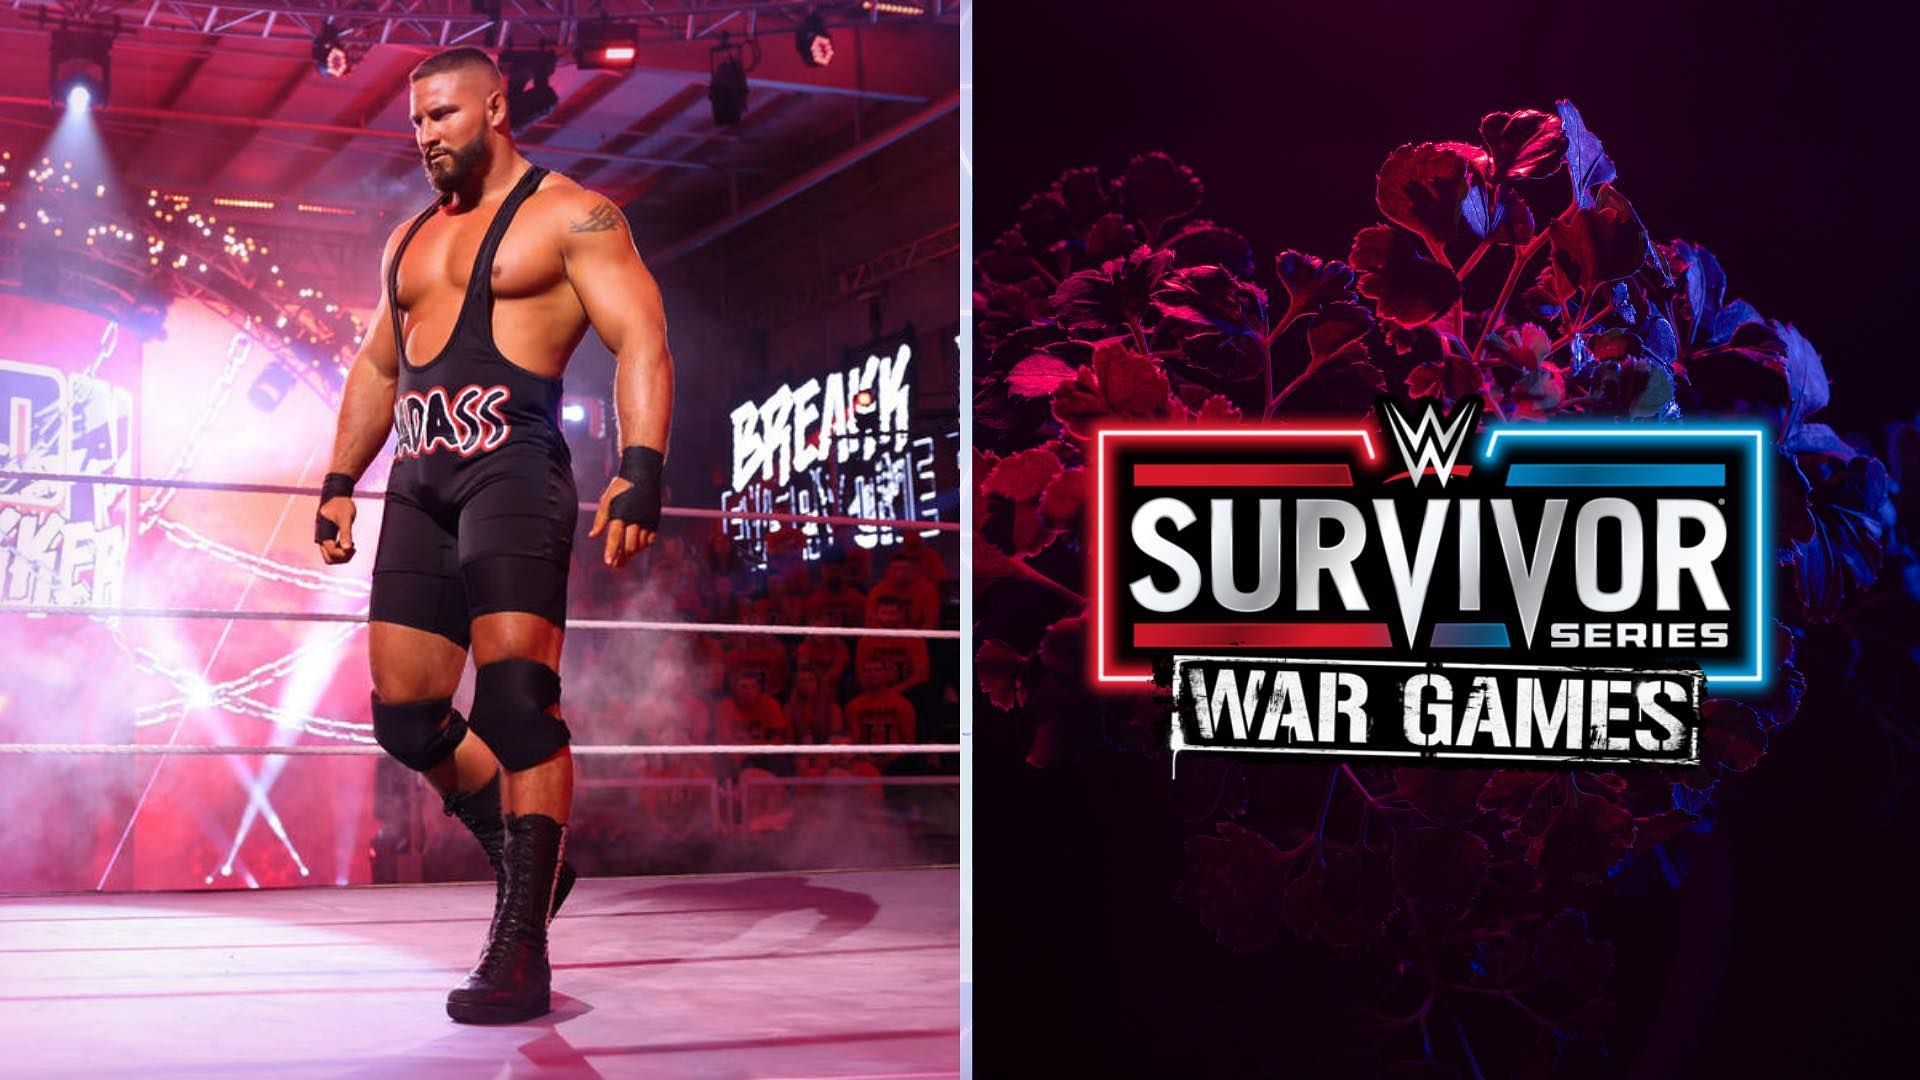 Some WWE NXT stars could appear at Survivor Series WarGames